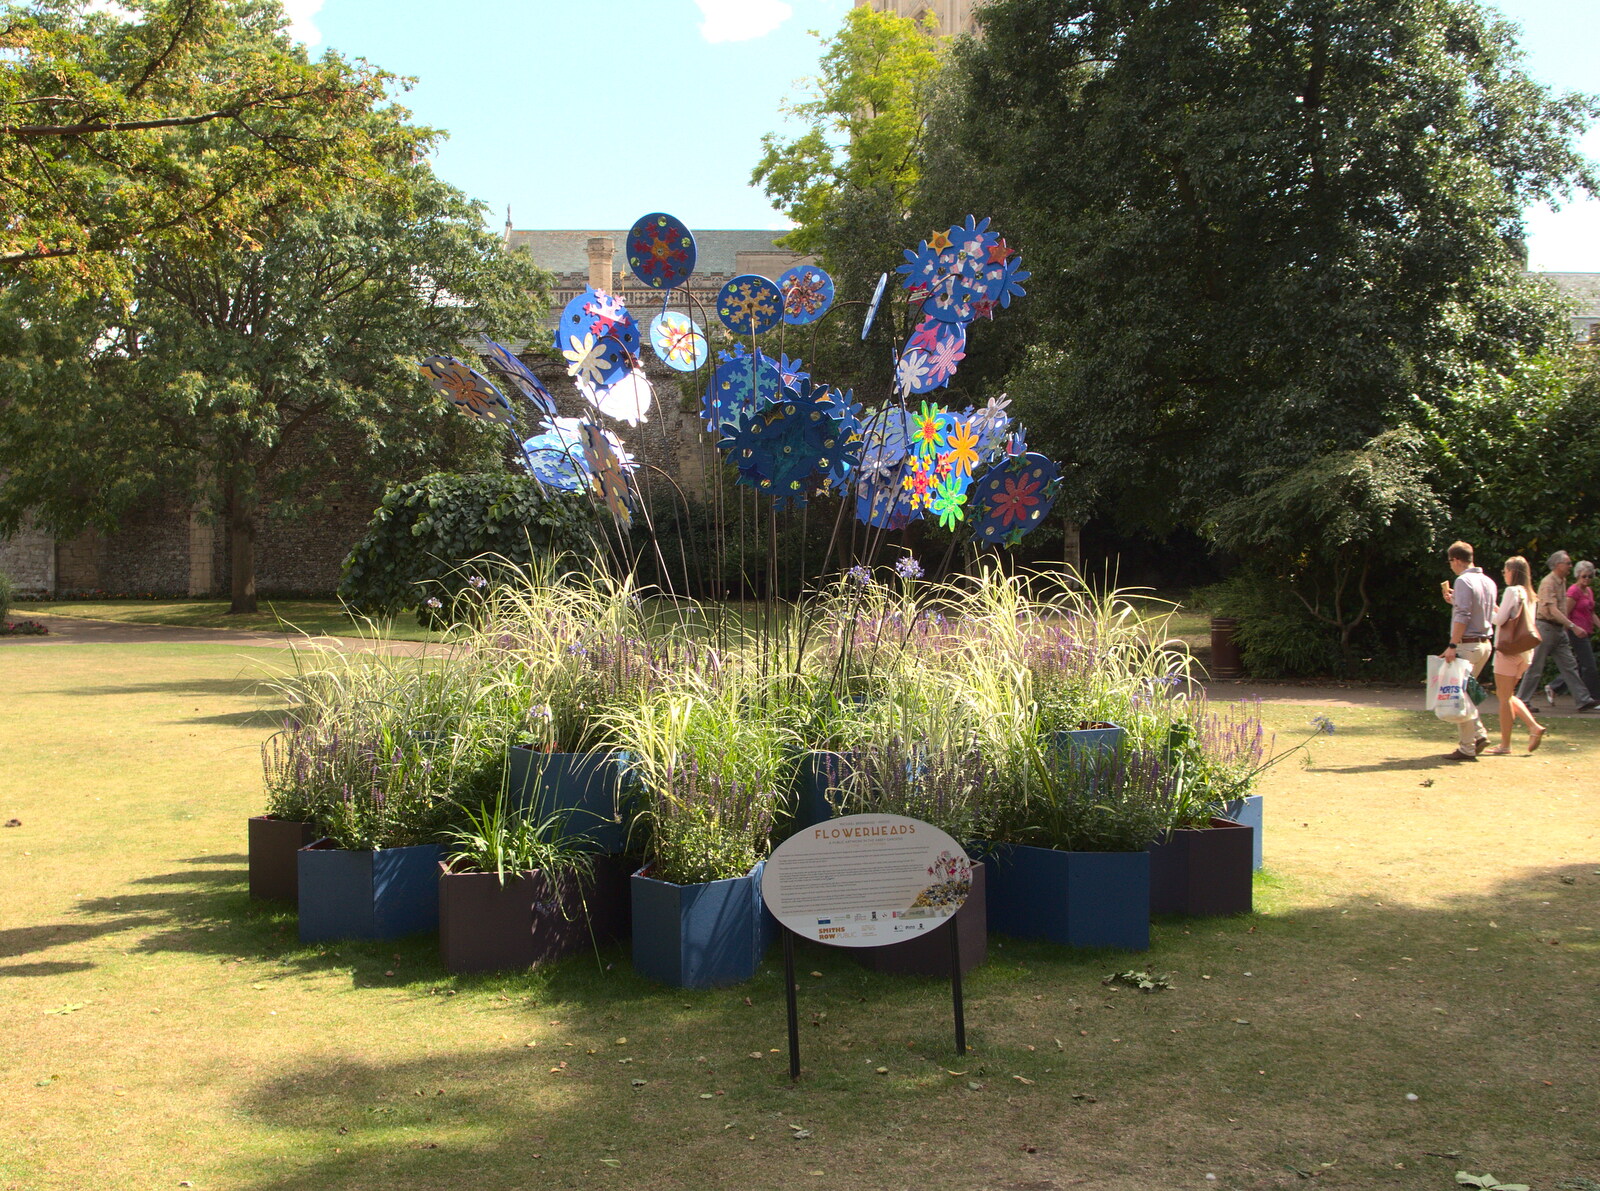 A plant-based installation from The BBs at Bacton, and Abbey Gardens, Bury St. Edmunds, Suffolk - 19th July 2015